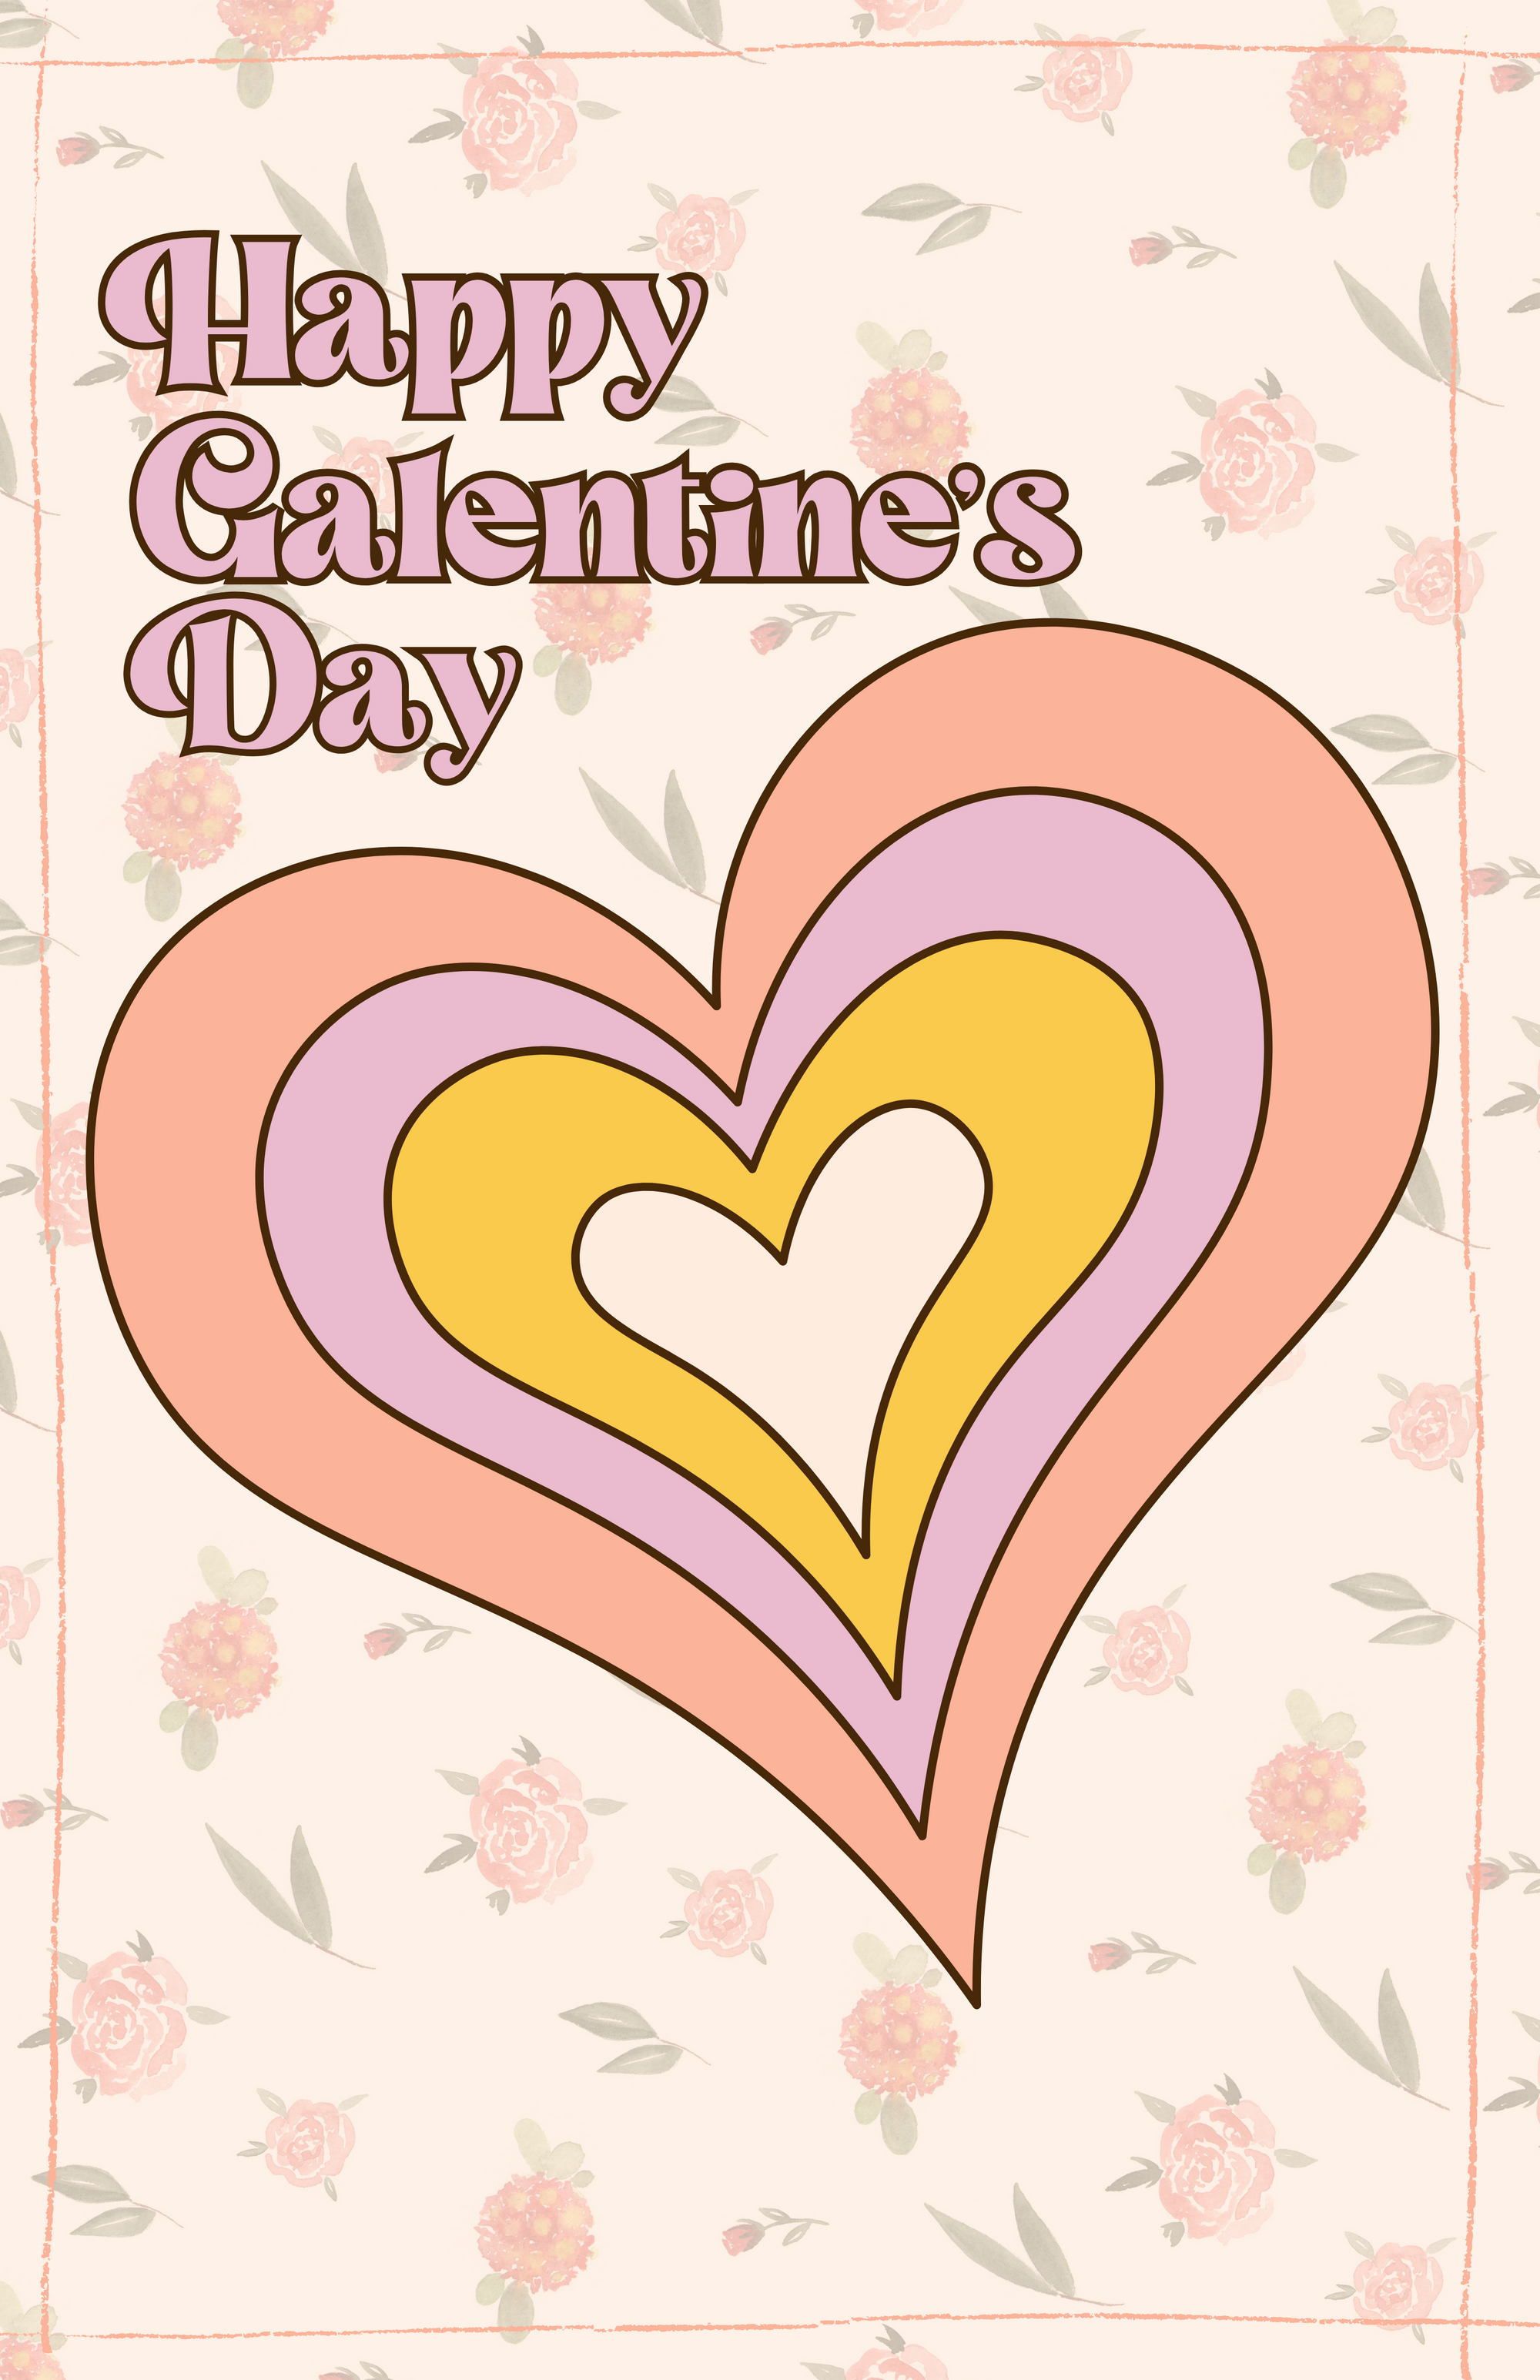 Lil Bee's Bohemian Galentine's Day E-Gift Card